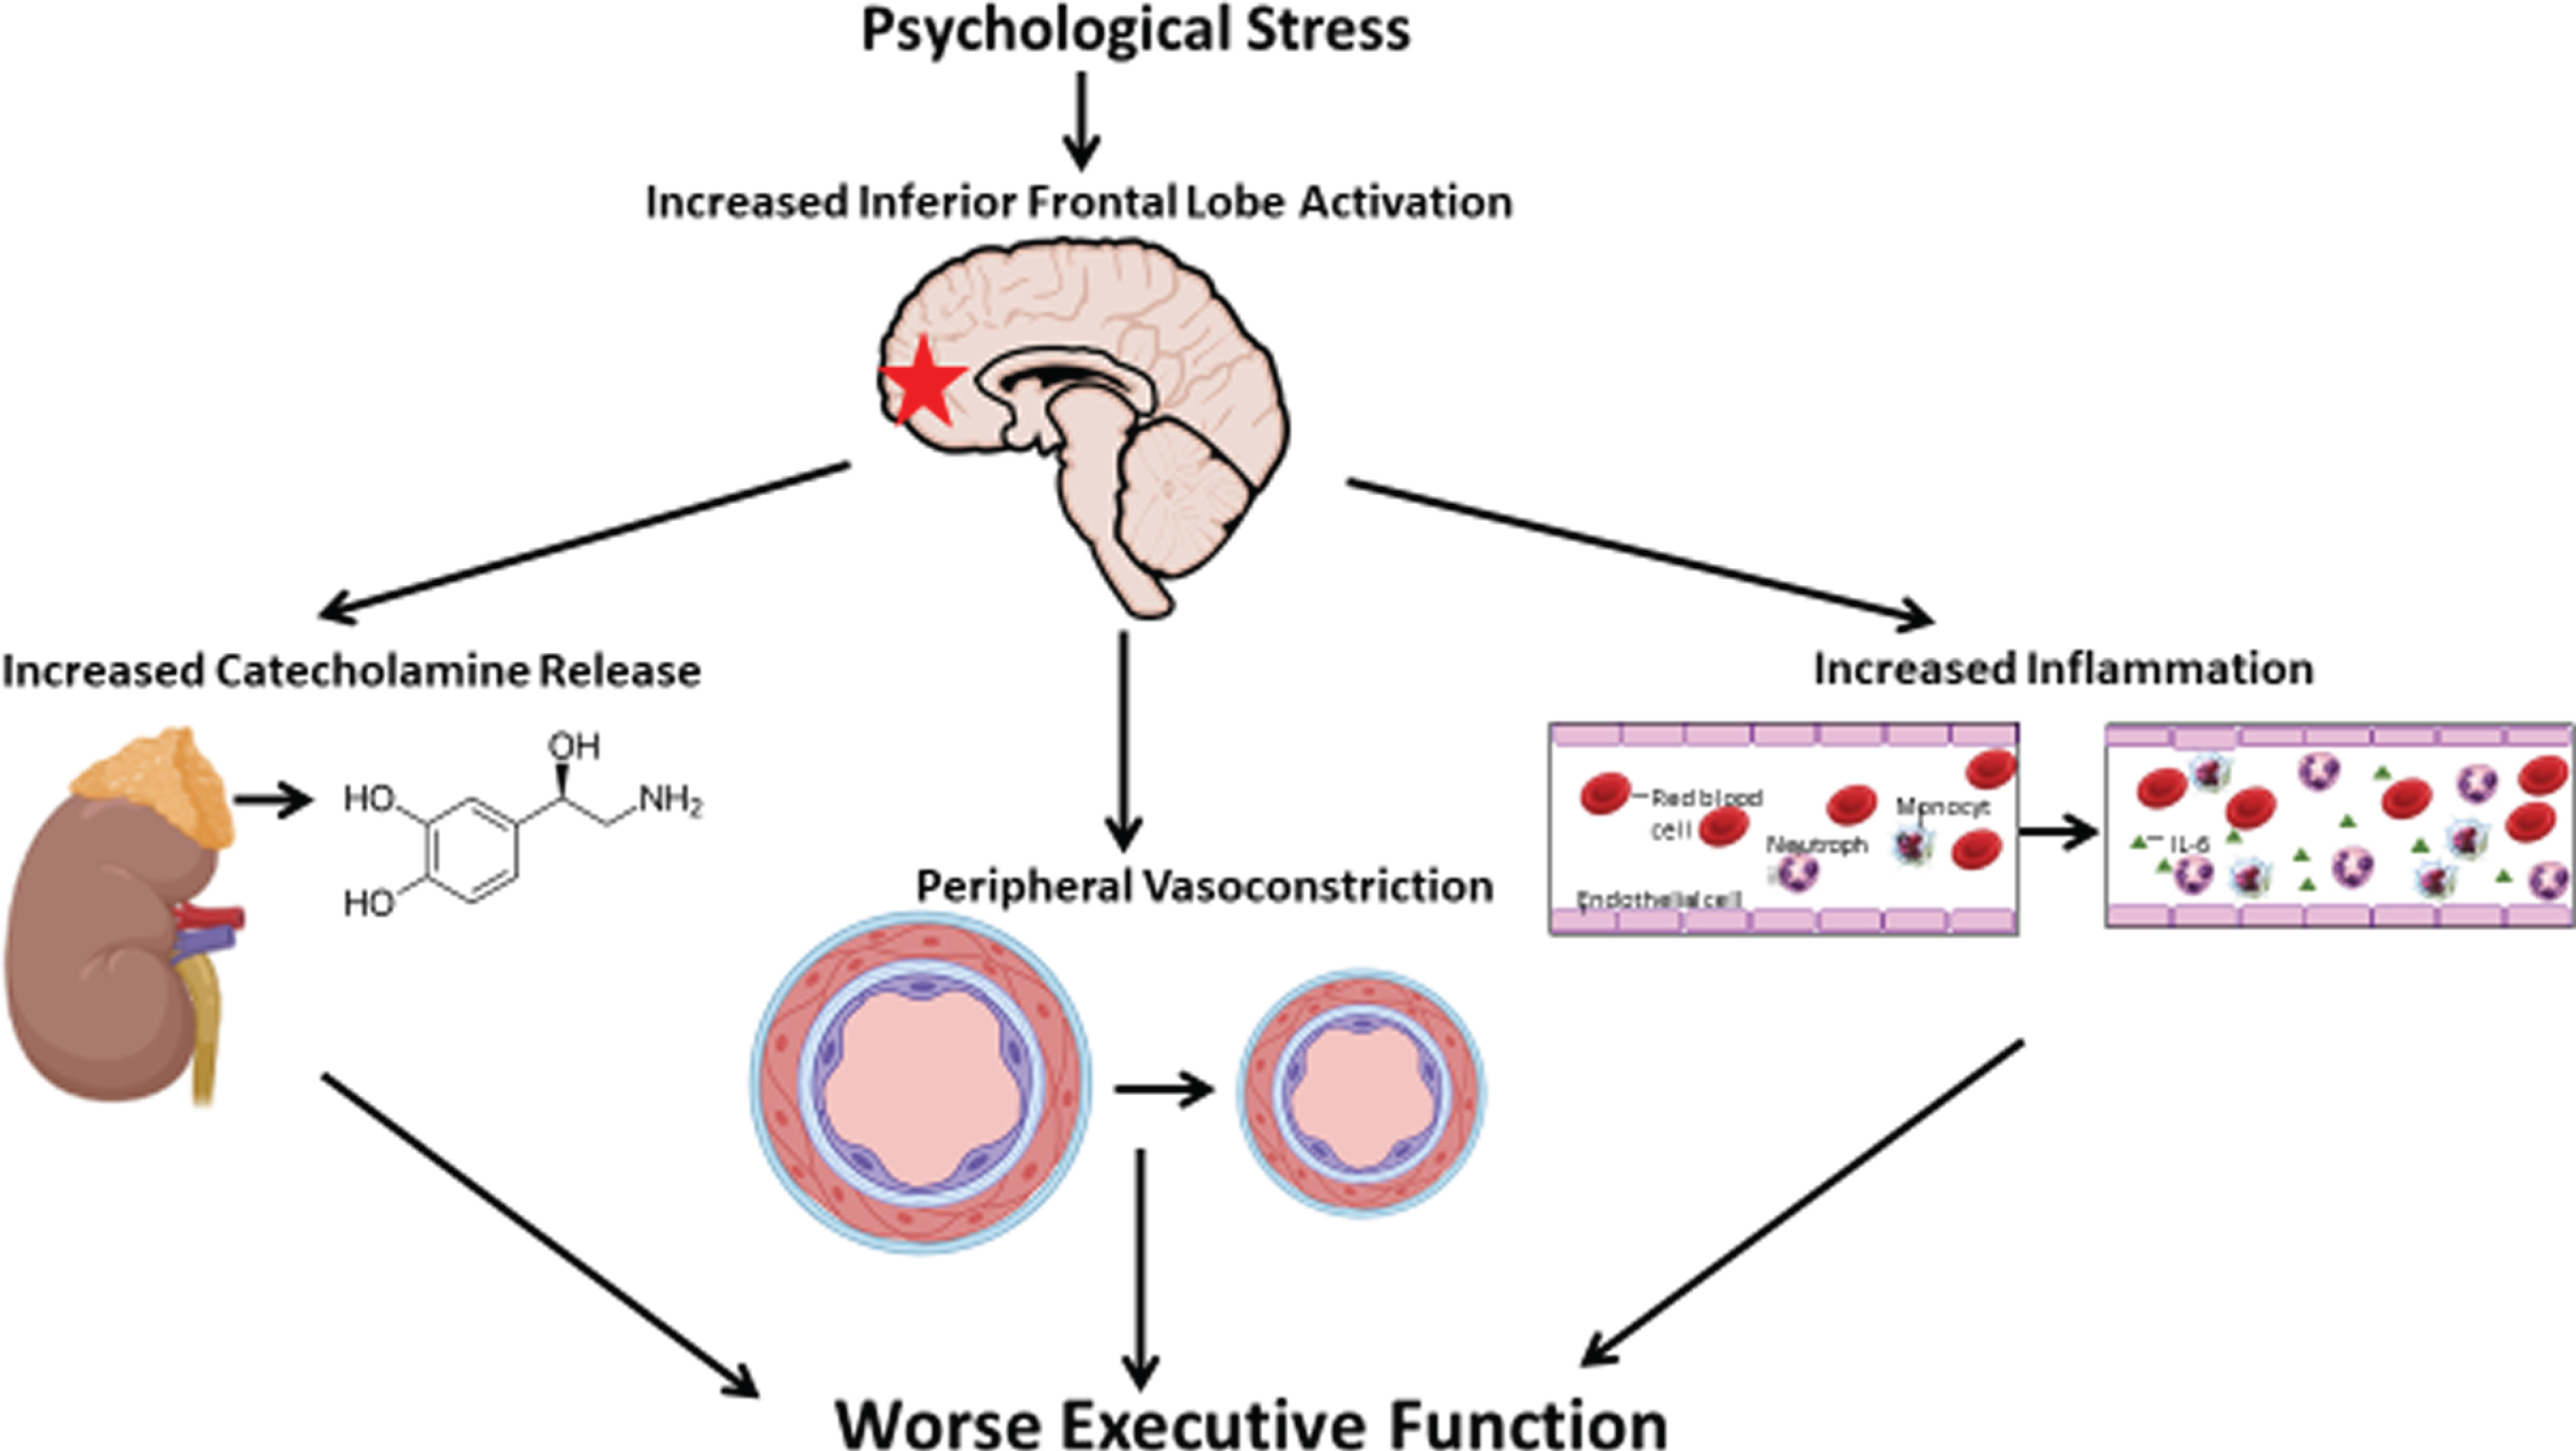 A model of acute psychological stress leading to executive function impairment. Mental stress-induced inferior frontal lobe activation is directly associated with worse executive function. Greater peripheral vasoconstriction, higher norepinephrine and interleukin-6 release to MS partly mediates the relationship between inferior frontal lobe activation and worse executive function.